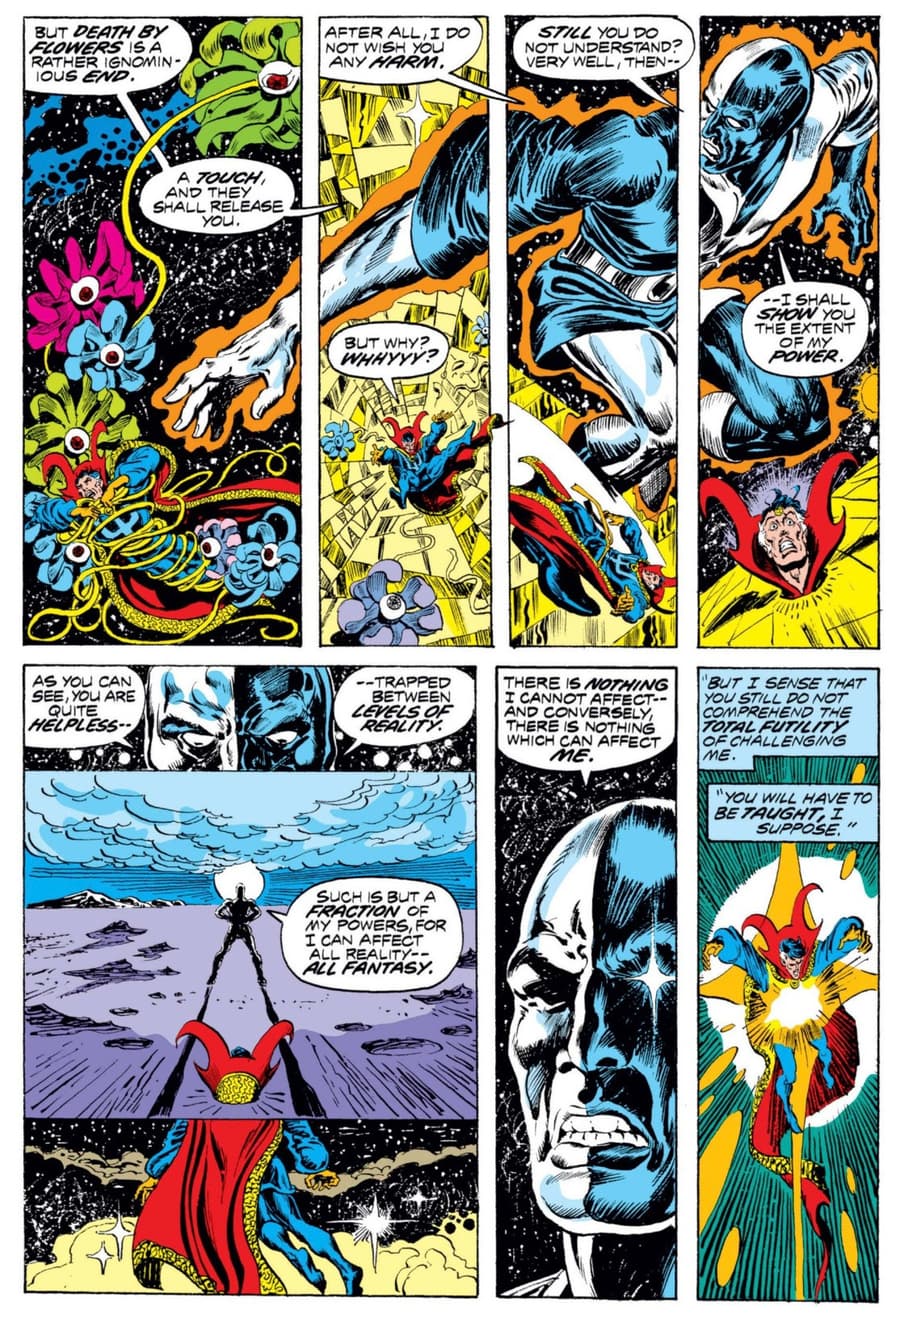 DOCTOR STRANGE (1974) #28 page by Roger Stern and Tom Sutton